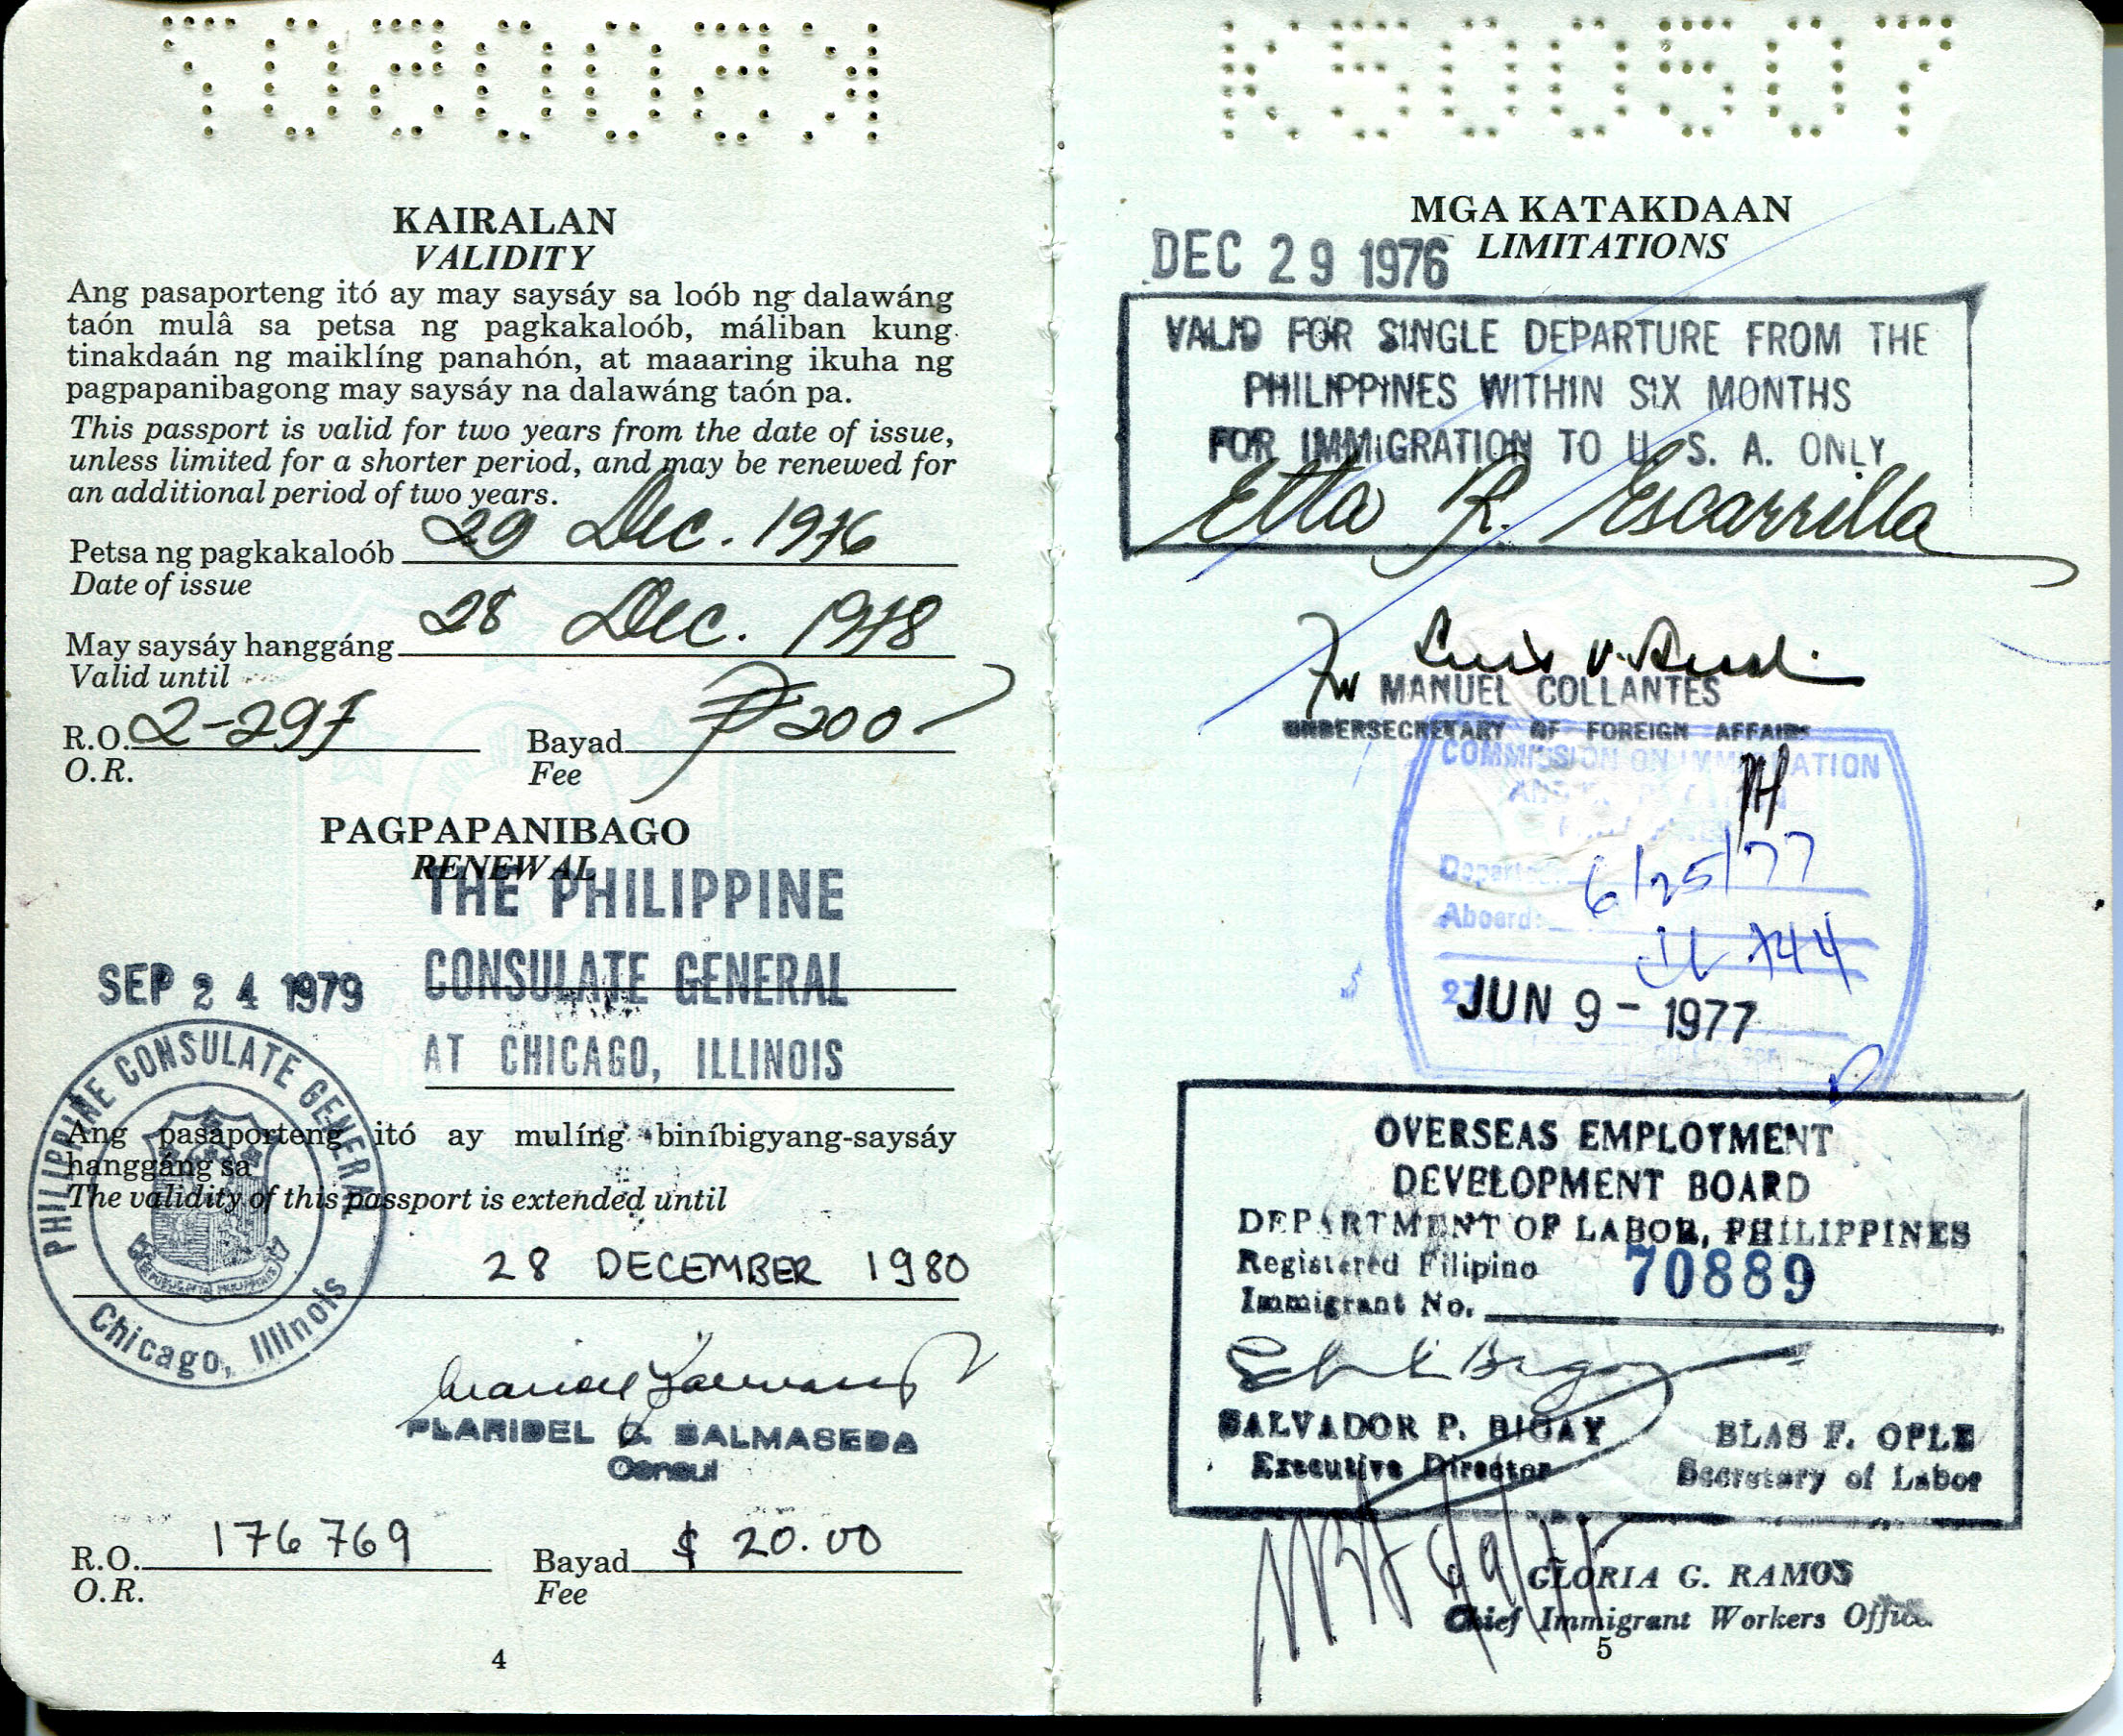 'Scan - Pages 4 and 5 of passport of Etta McKenna.1976 Passport from the Philippine Immigration Office, during process to immigrate to the US.Names of passport pages in Wika Filipino “Pasaporte” and “Republica”Notes from Sarah Carlson, in discussion with McKenna: “First Phil. passport I used when I immigrated to the US in 1977. It reminded me of the months of overtime work in order to afford, prepare and complete all documents needed to come to the US. Without any relatives tosupport me in the US, I had to make sure I had enough to support myself the first few months in the new land until I got a job. The process, even though difficult, is worth remembering.” Any views, findings, conclusions, or recommendations expressed in this story do not necessarily represent those of the National Endowment for the Humanities. (c) Field Museum of Natural History - CC BY-NC 4.0